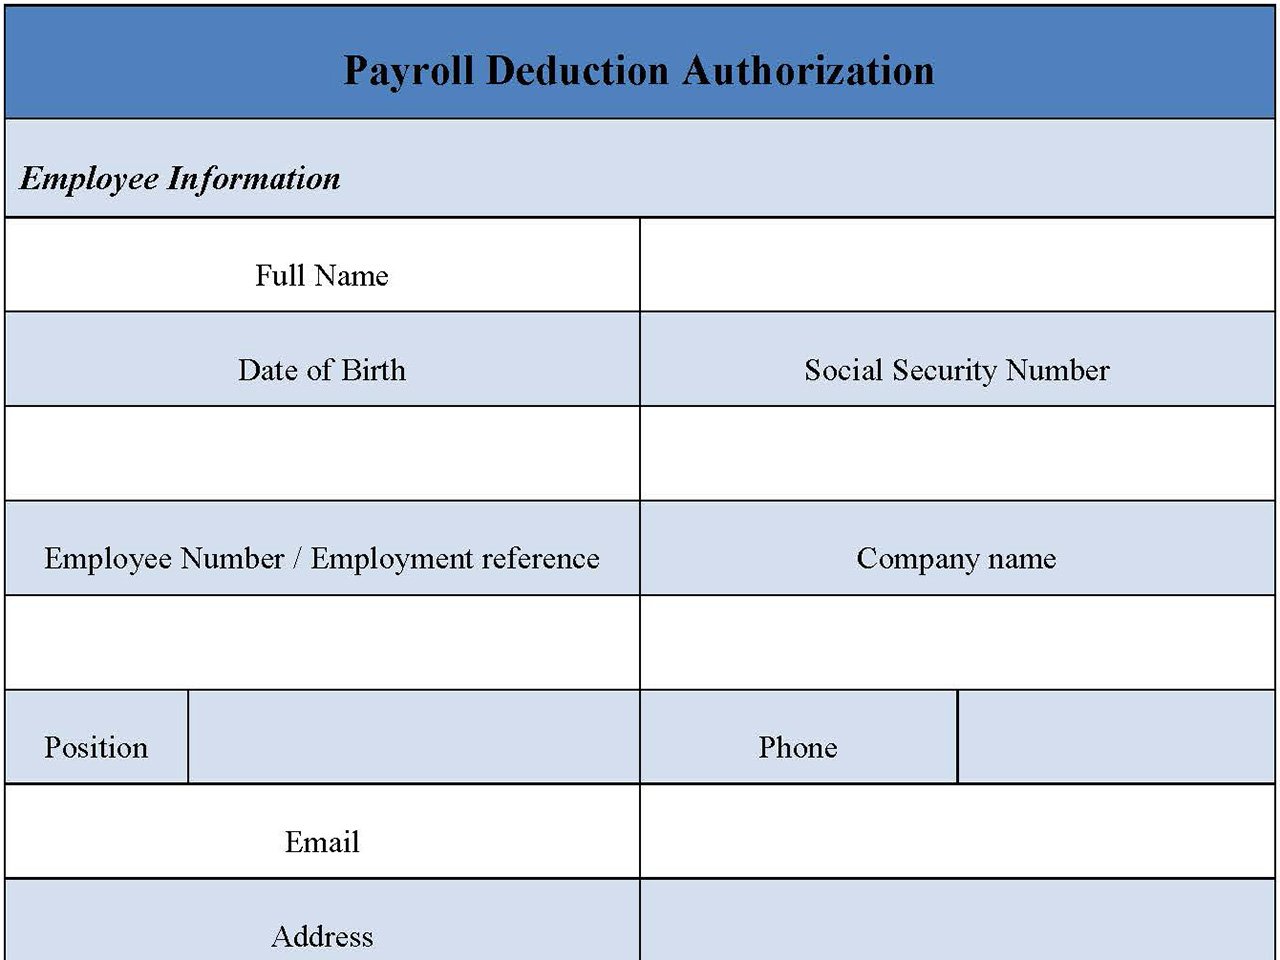 Payroll Deduction Authorization Form